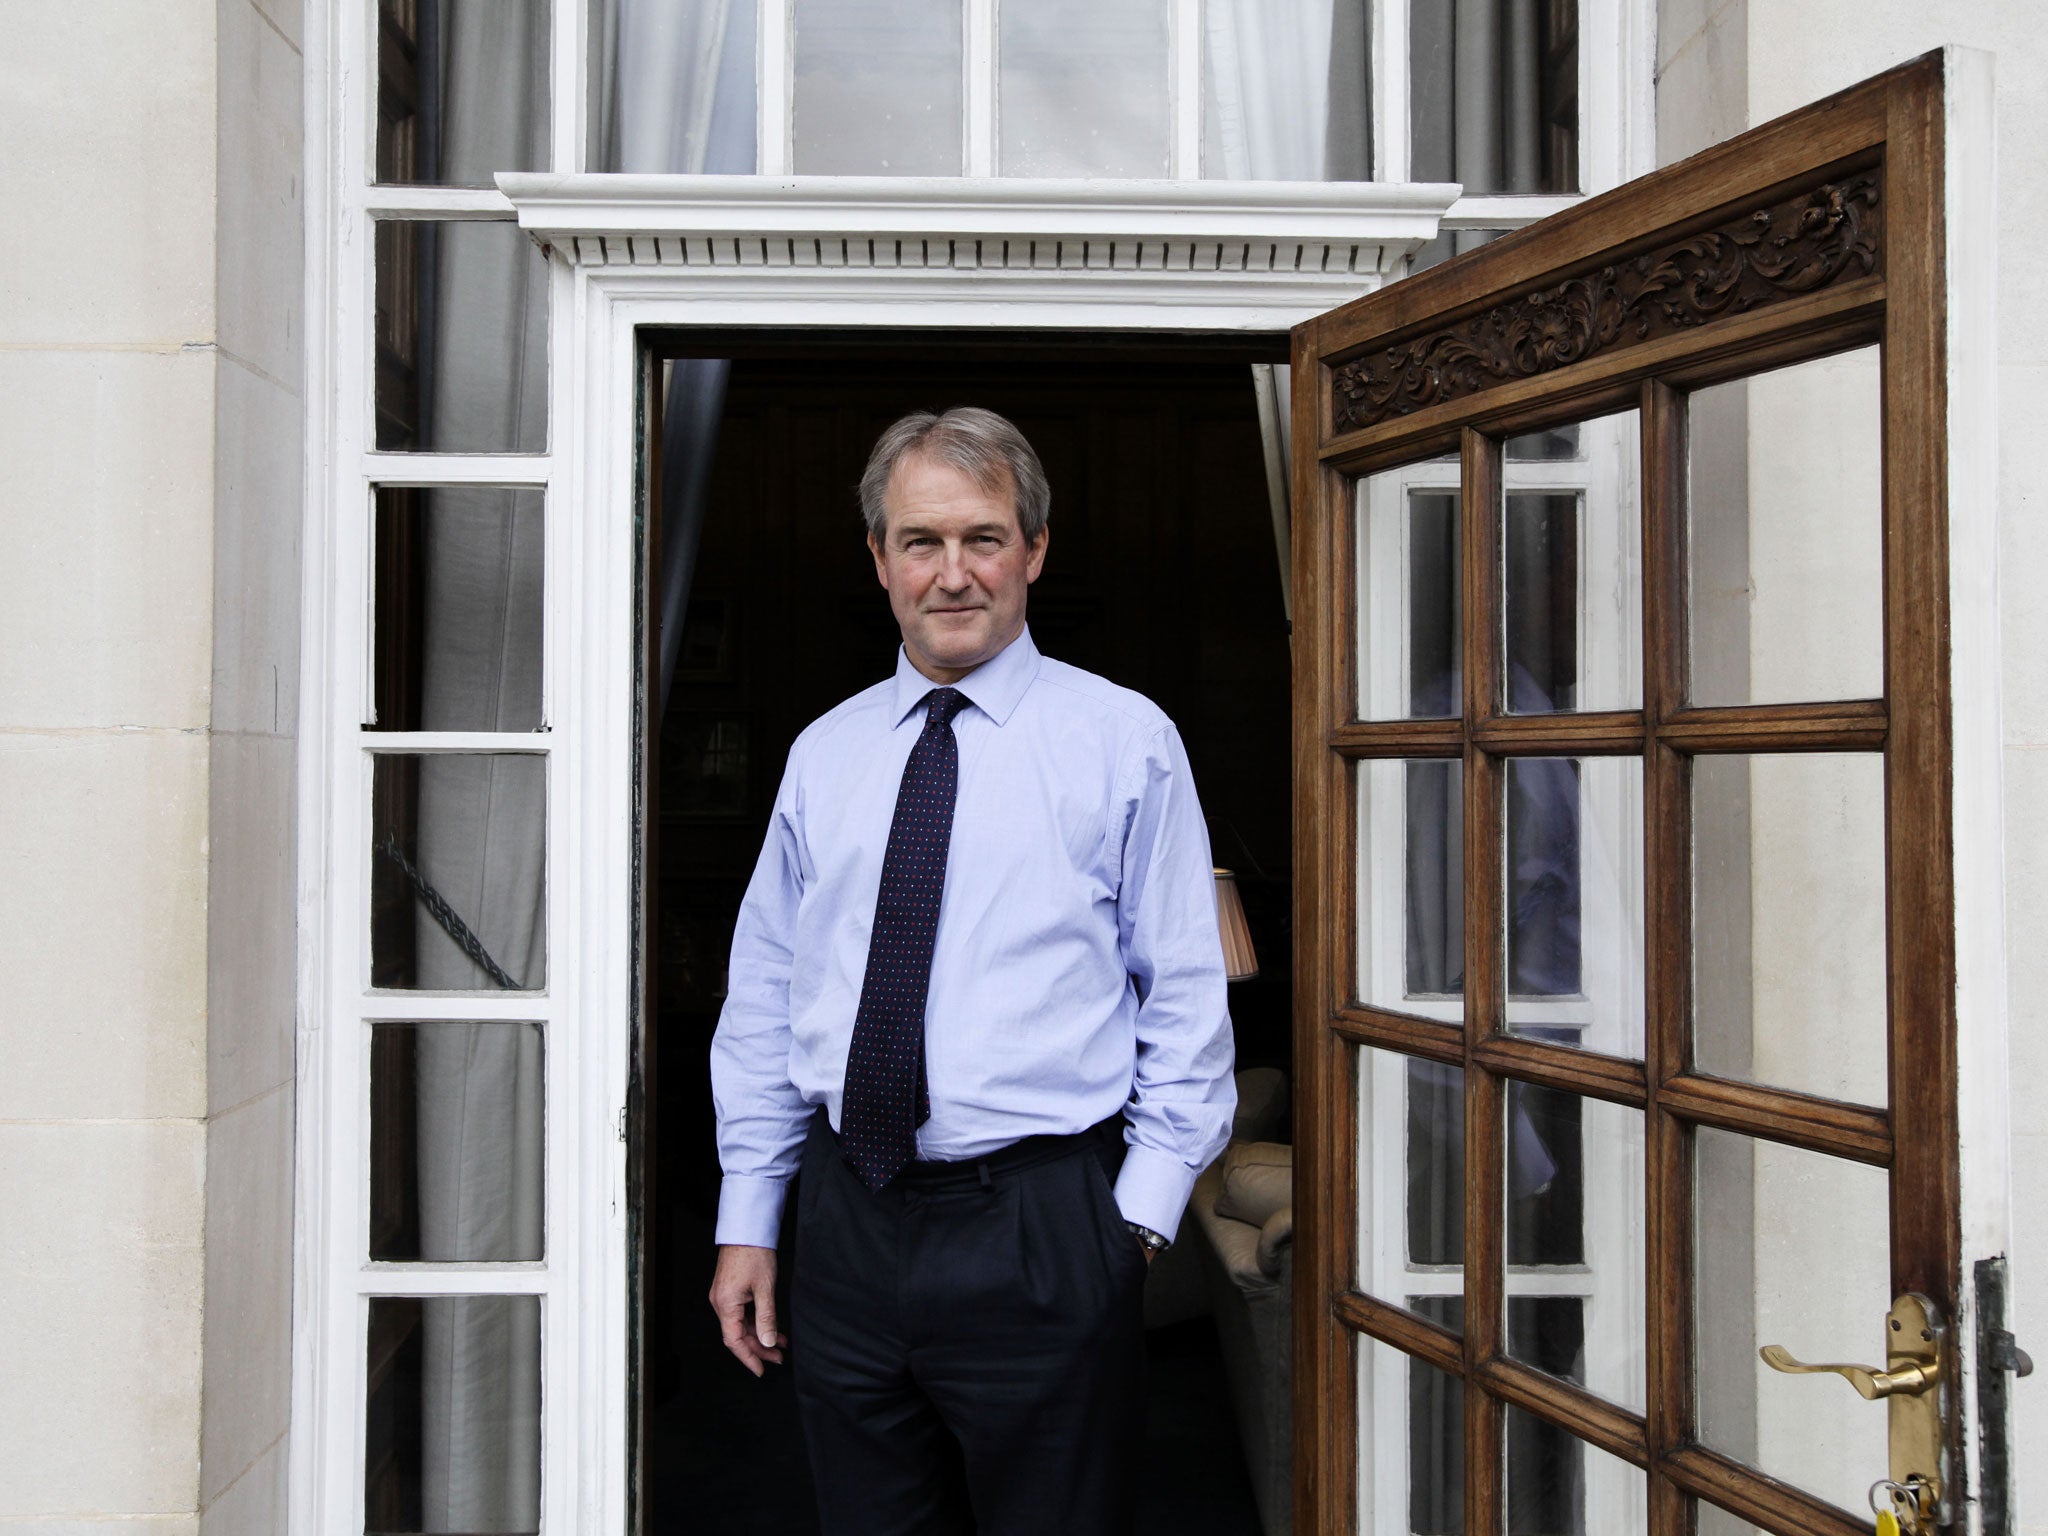 Owen Paterson sees his job as defending the countryside against an urban elite